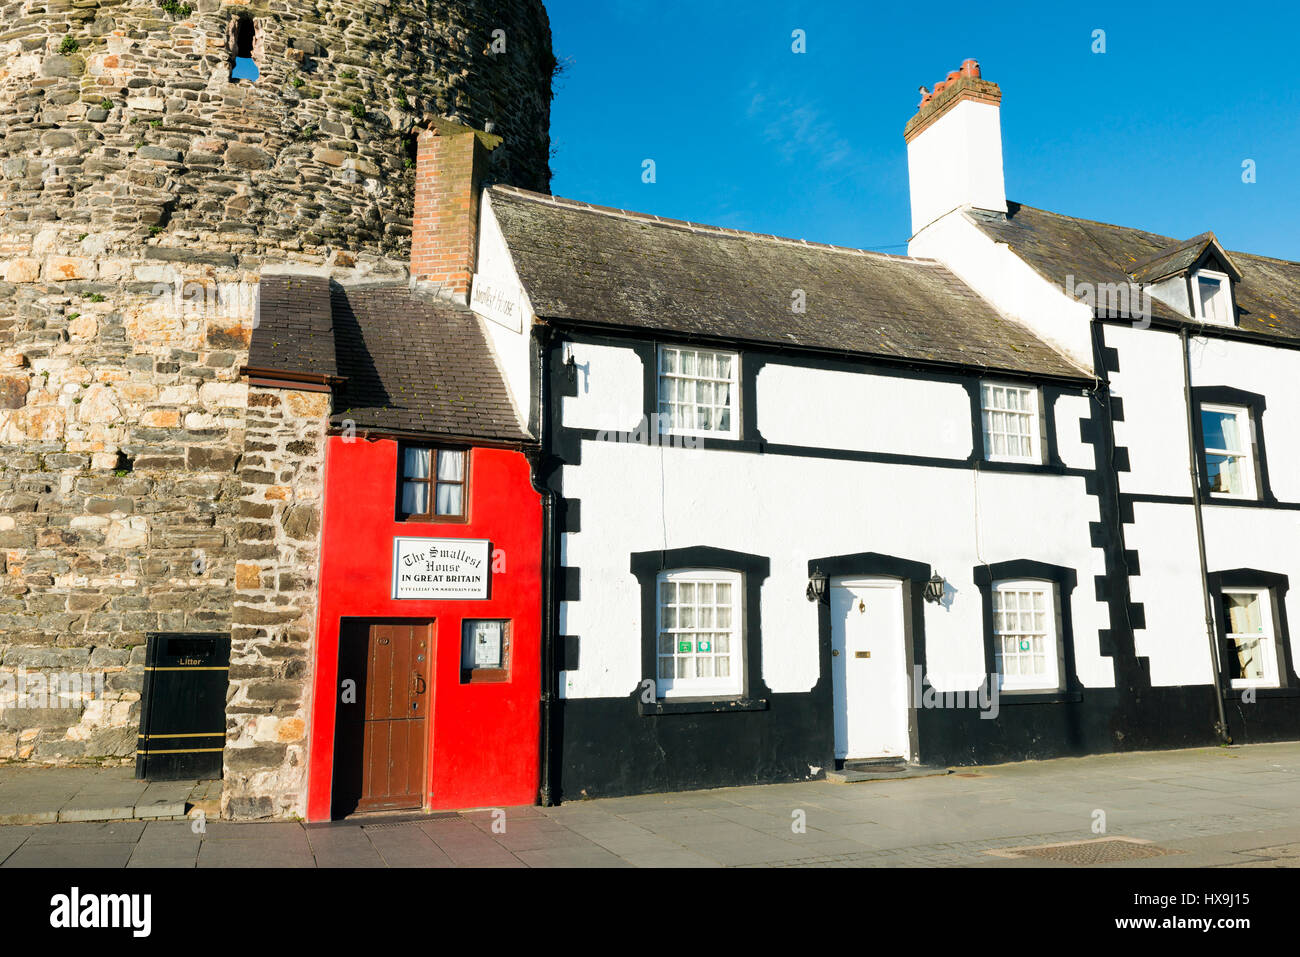 The smallest house in Great Britain, Conwy, Wales, UK. Stock Photo